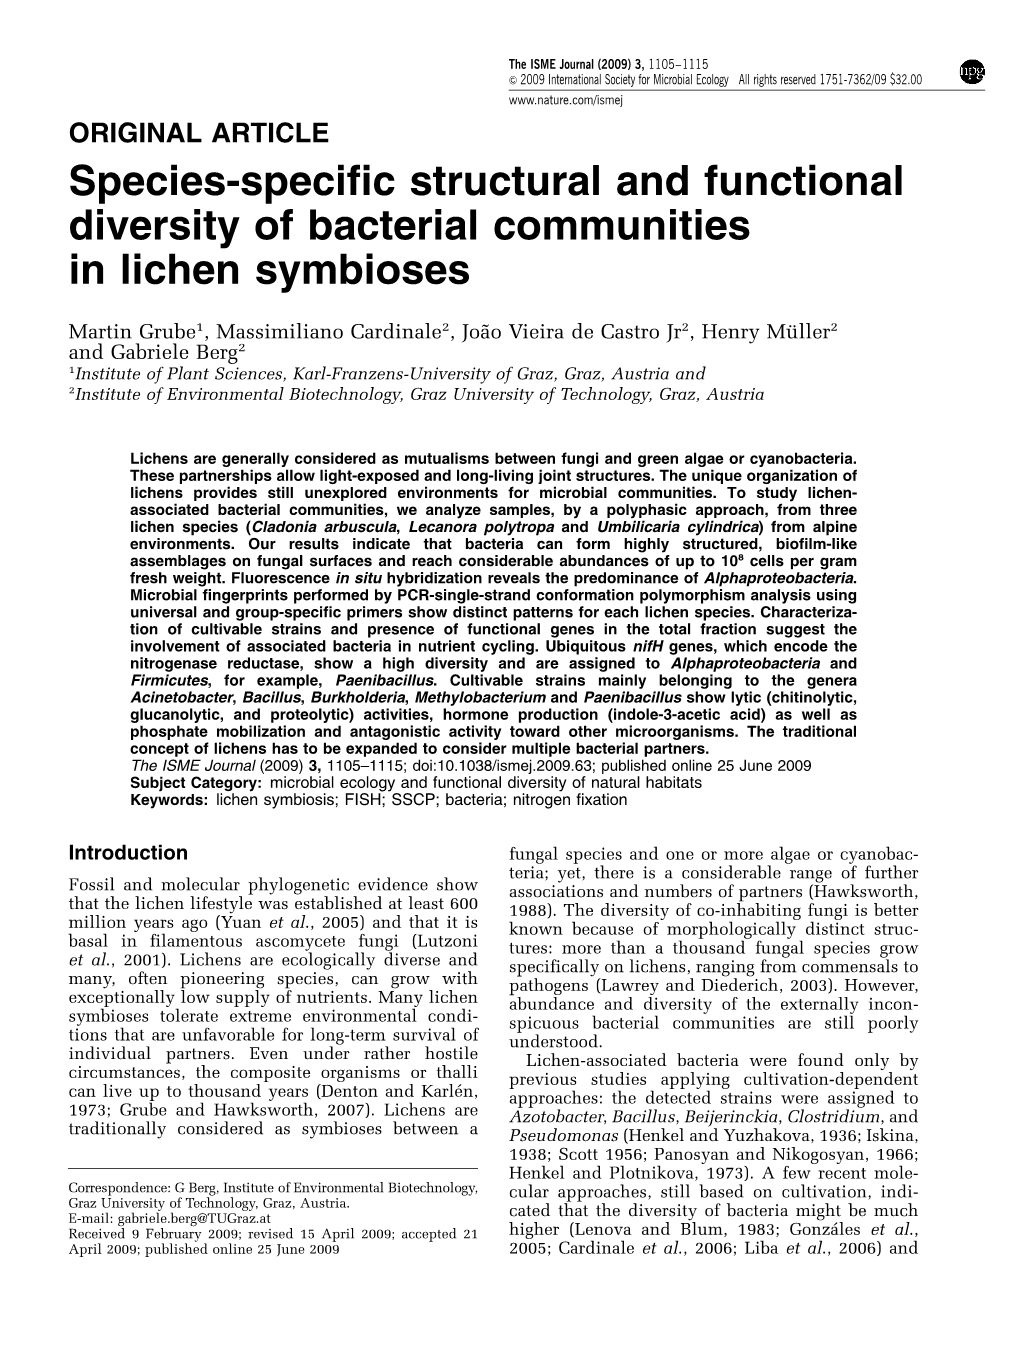 Species-Specific Structural and Functional Diversity of Bacterial Communities in Lichen Symbioses